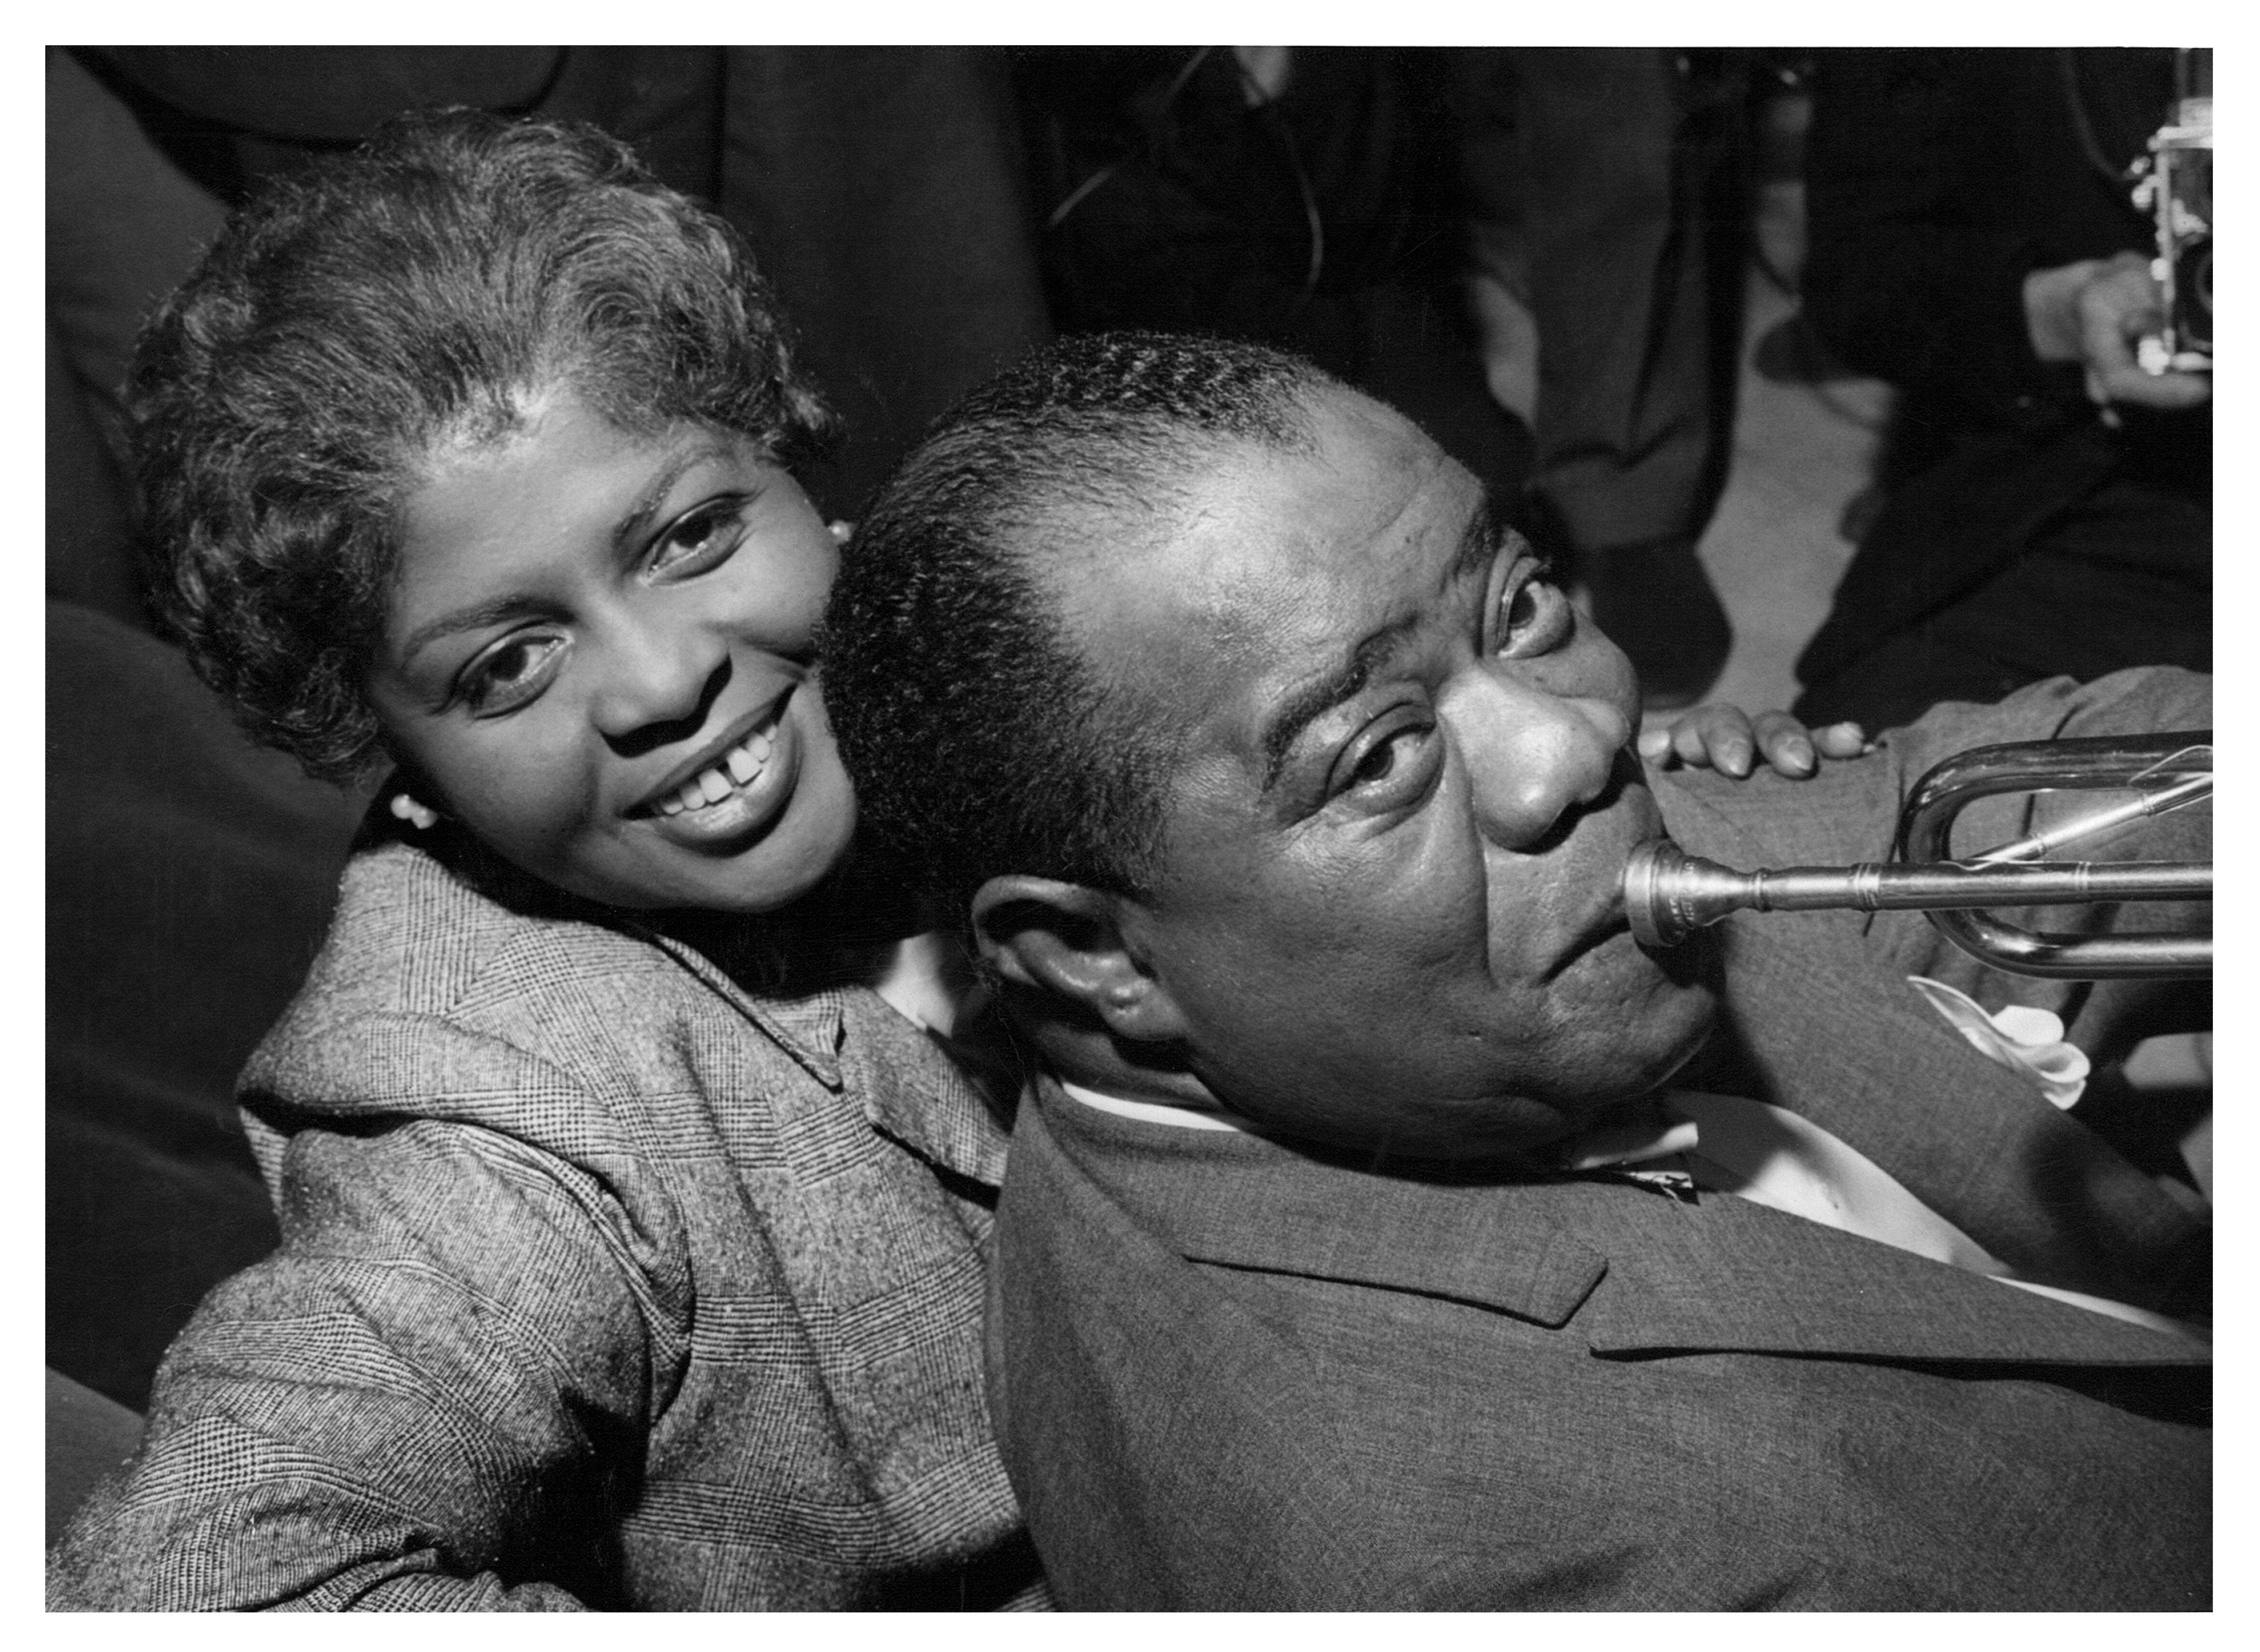 Publicity still portrait of American jazz musician Louis Armstrong and his wife Lucille, 1960 | Photo: GettyImages